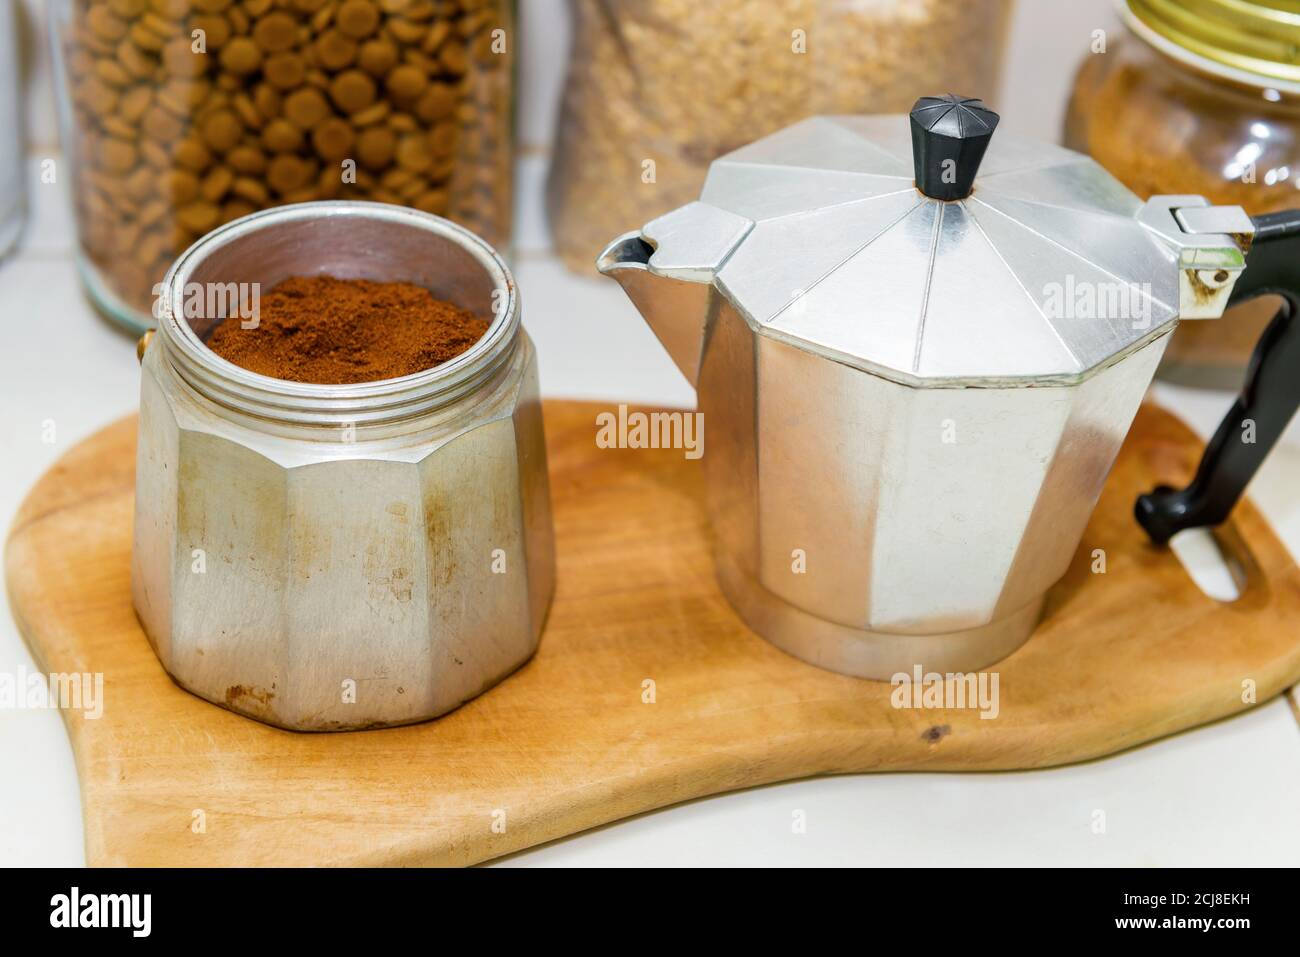 Old coffee maker with coffee powder on the table Stock Photo - Alamy